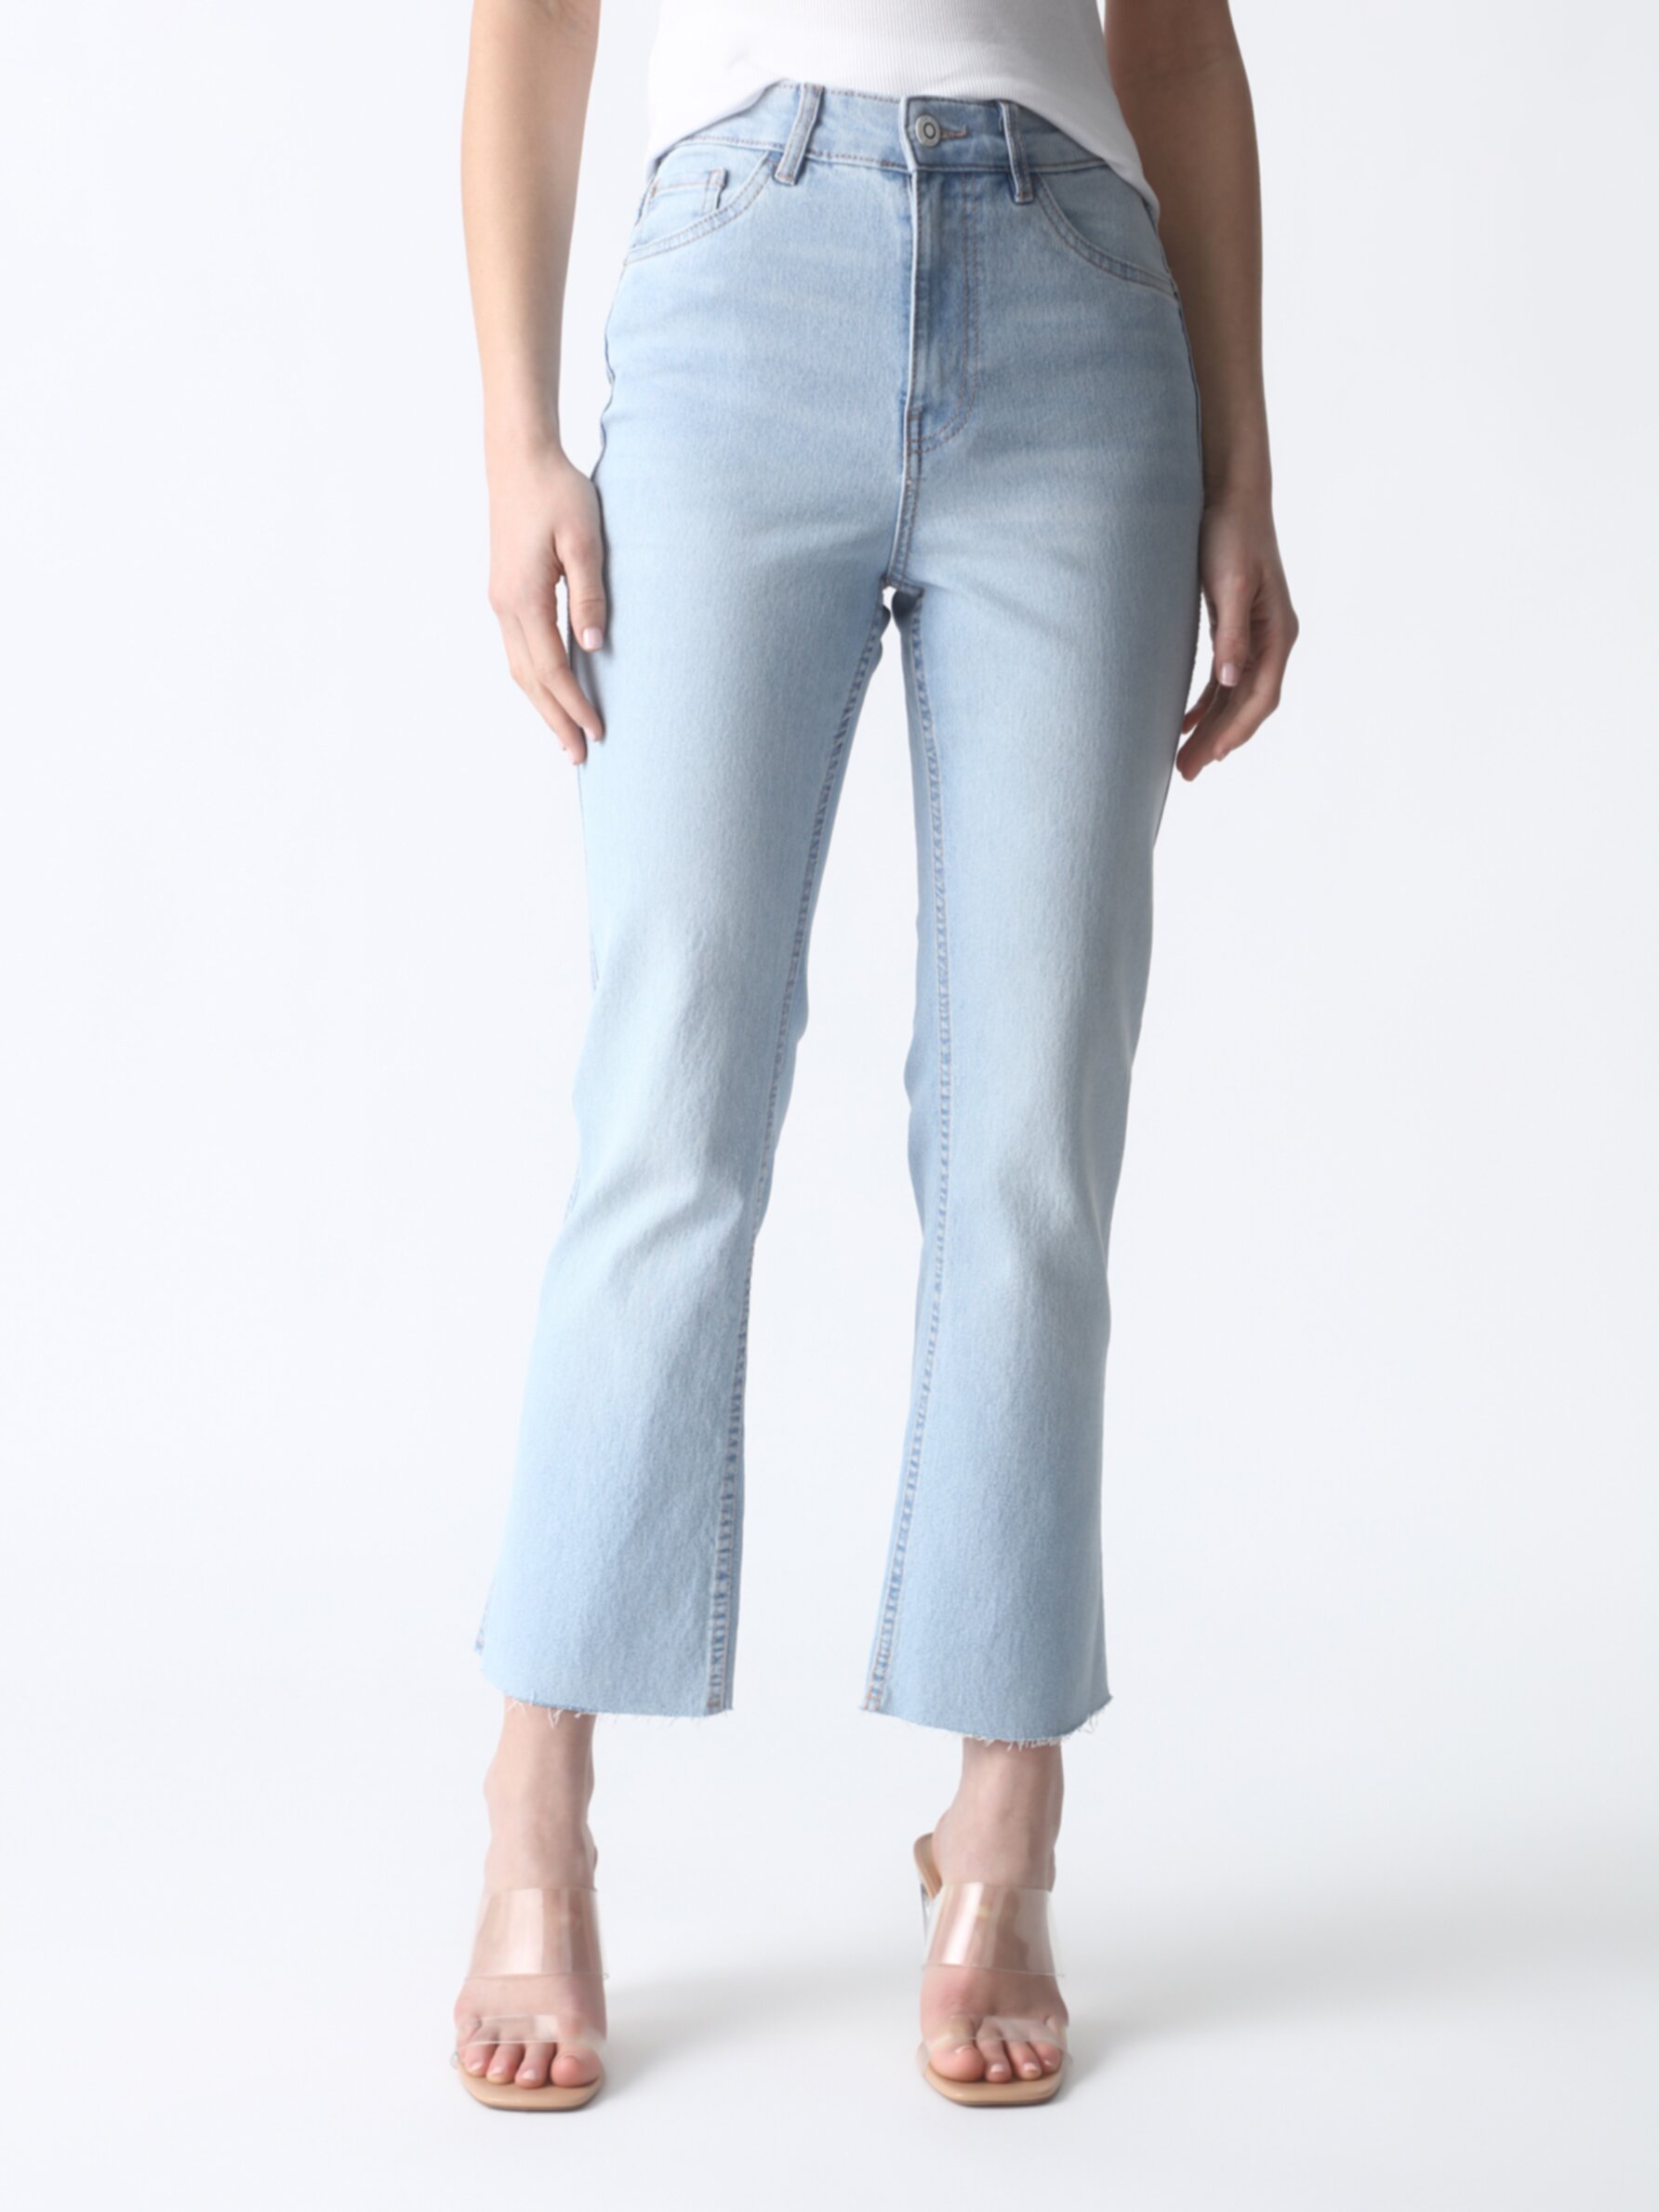 Mini flared jeans - Flared - Jeans - CLOTHING - Woman 